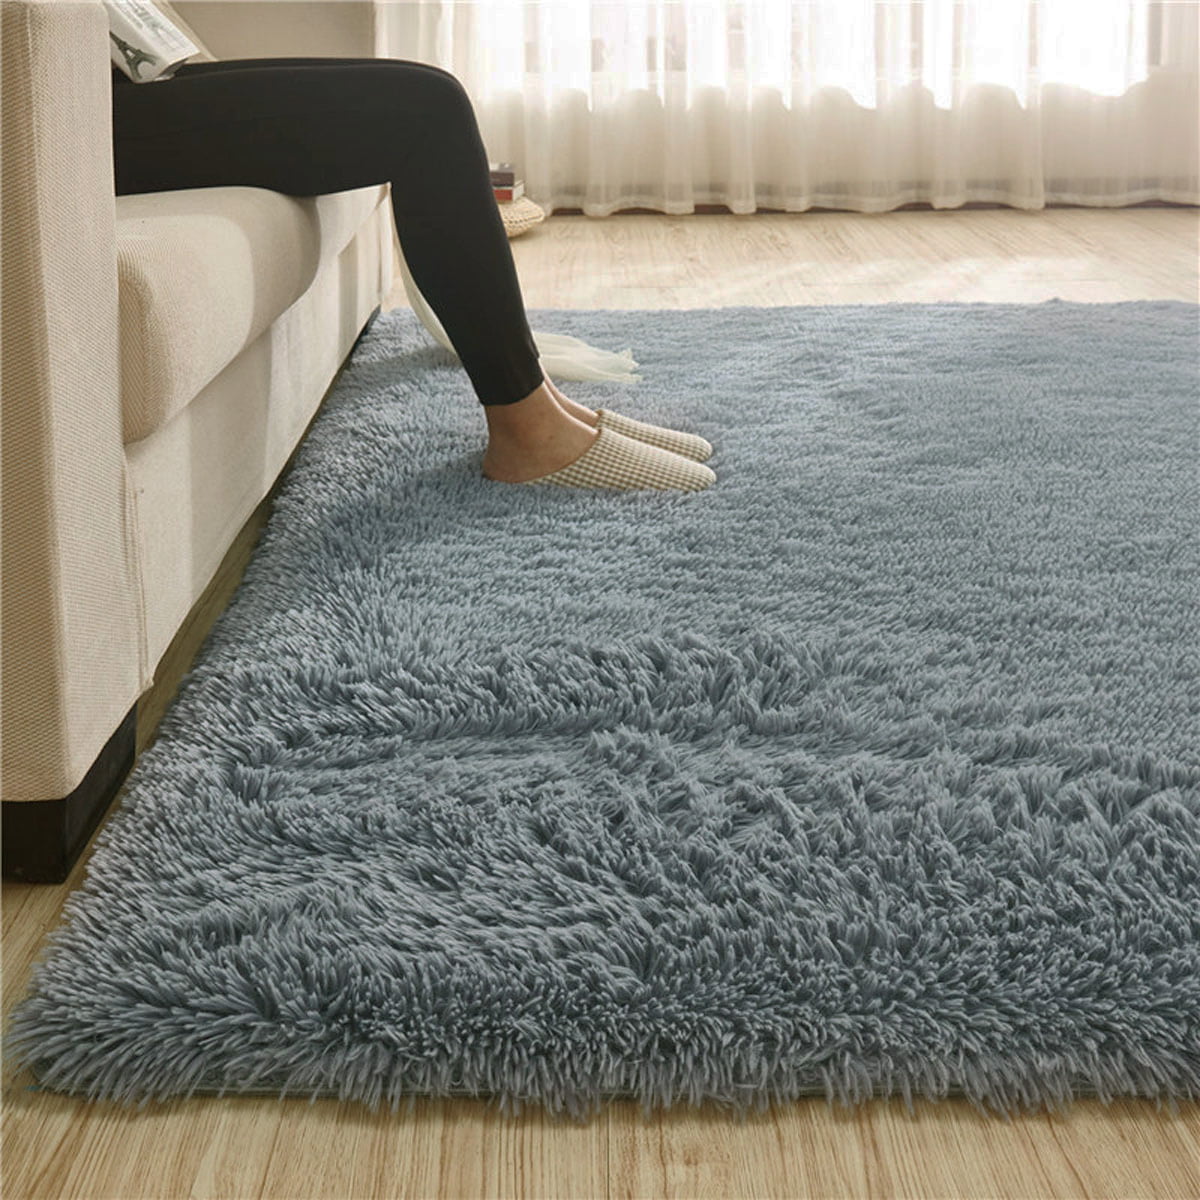 Round 4 Feet Plush Home Hotel Pad Rugs Easy Clean Circle Area Rug for Everyday Use Blue Gradient Square Texture Non-Slip Floor Mats Cozy Carpet FAMILYDECOR Indoor Runner Rugs